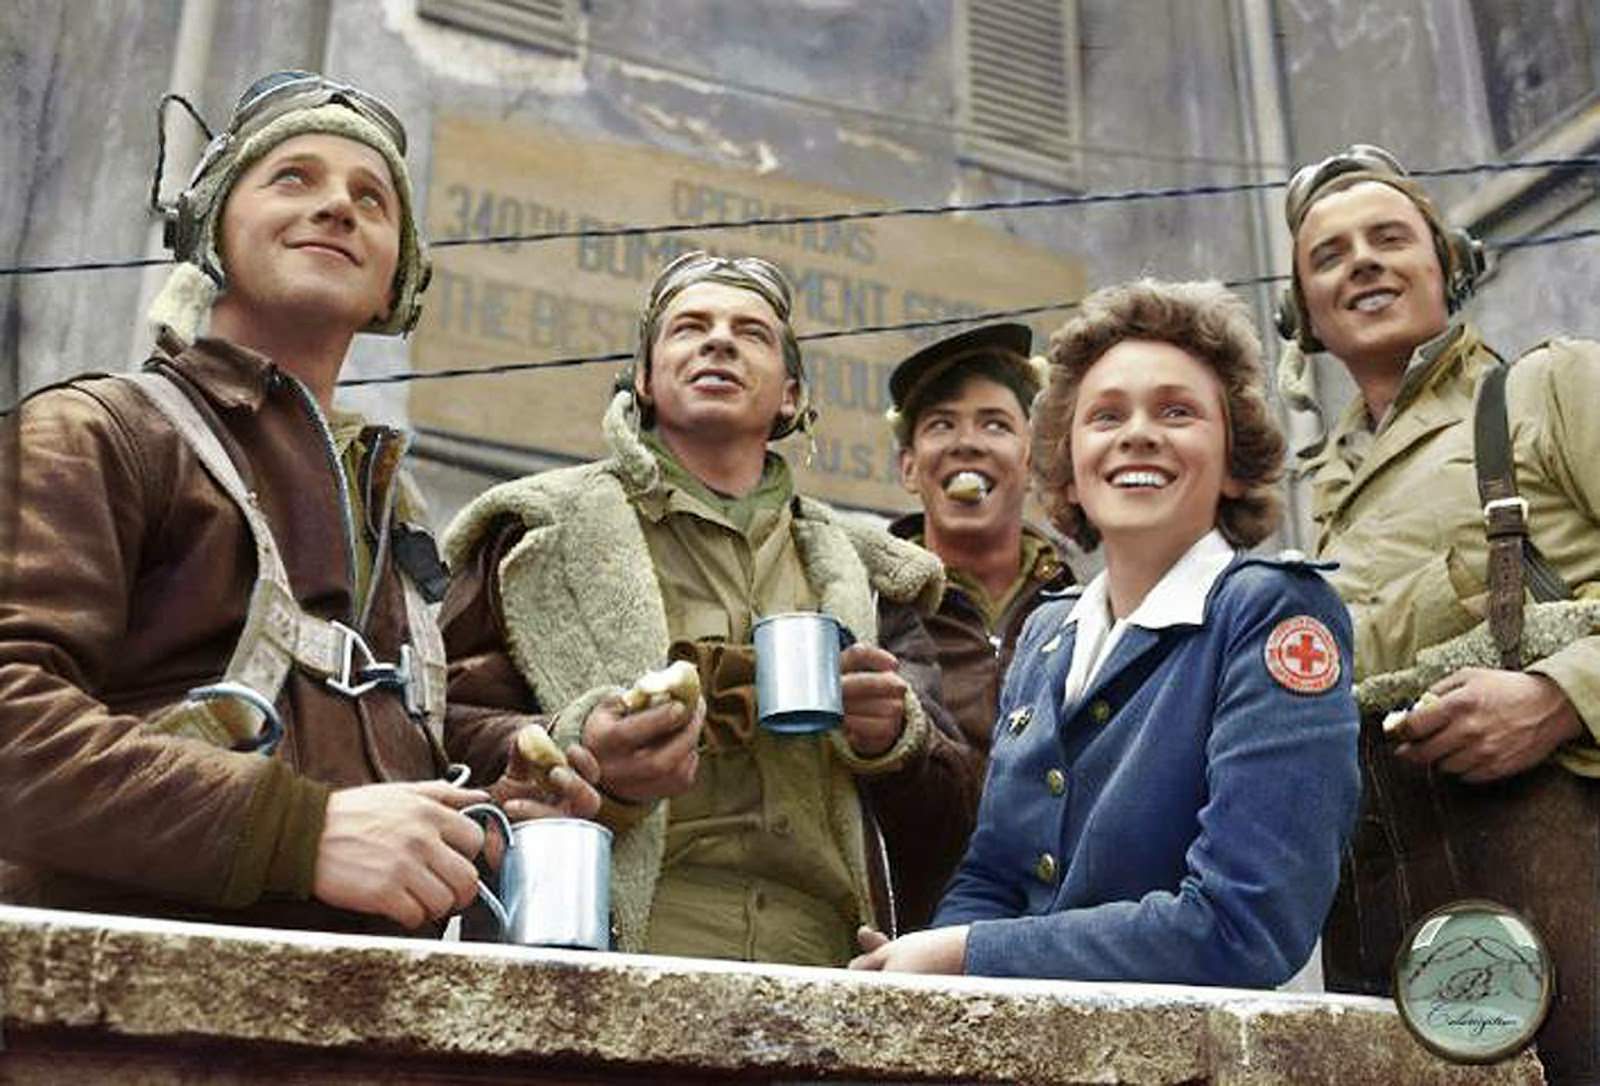 From Left to Right, B-25 crew members: Sgt. John C. Bellendir (Gnr.), Chicago; Sgt. Raymond J. Swingholm (Eng/Gnr.), Lebanon, PA; Sgt. Harris B. Pate (Rd/Gnr.), Hamlet, NC; Red Cross Clubmobile Worker, Peggy Steers from White Plains, NY. and T/Sgt. Aubrey Chatters (Rd/Gnr.), Milington MI. All from t